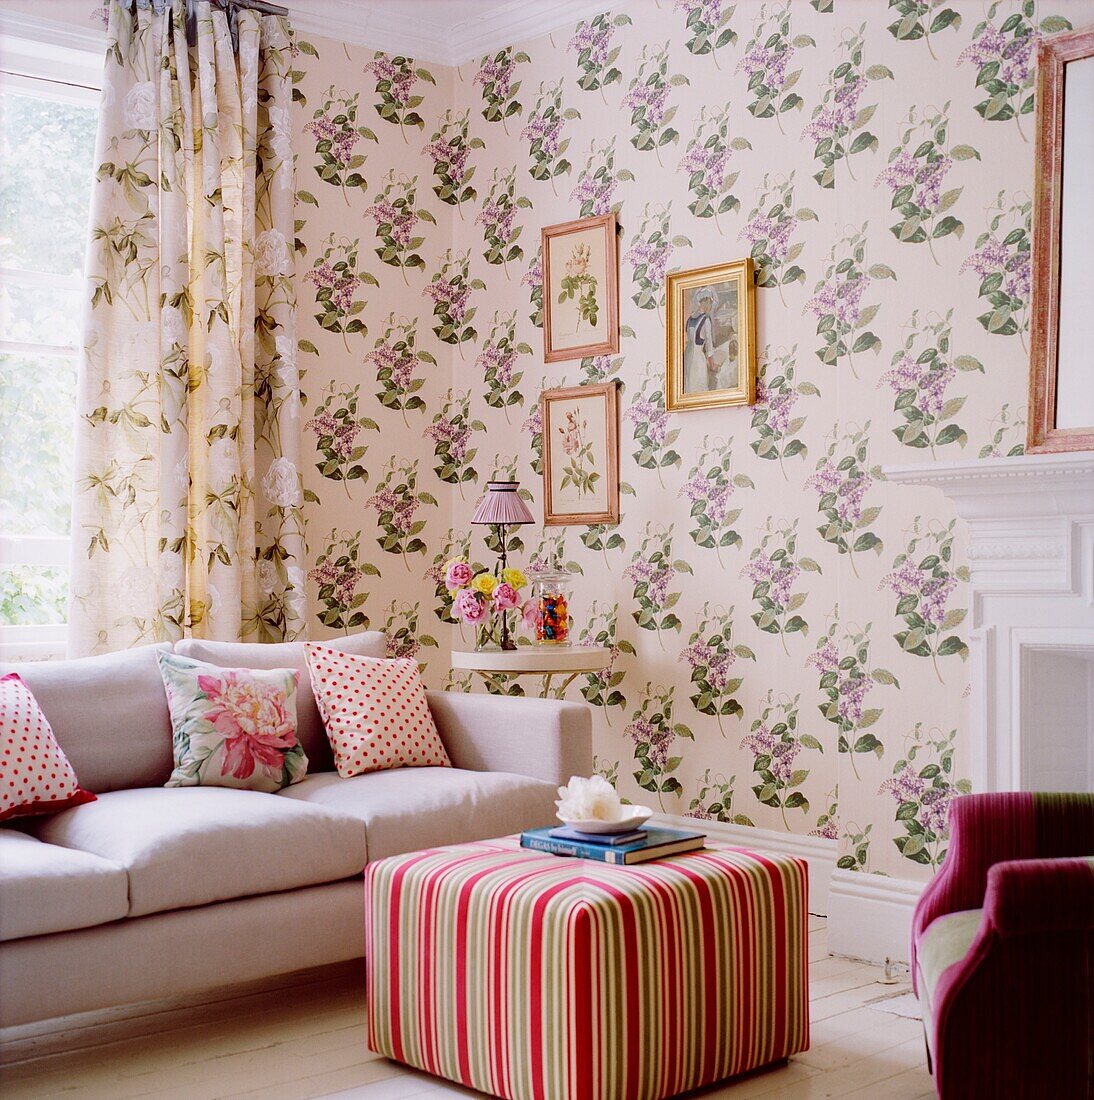 Striped ottoman in room with patterned floral print wallpaper and contrasting curtains